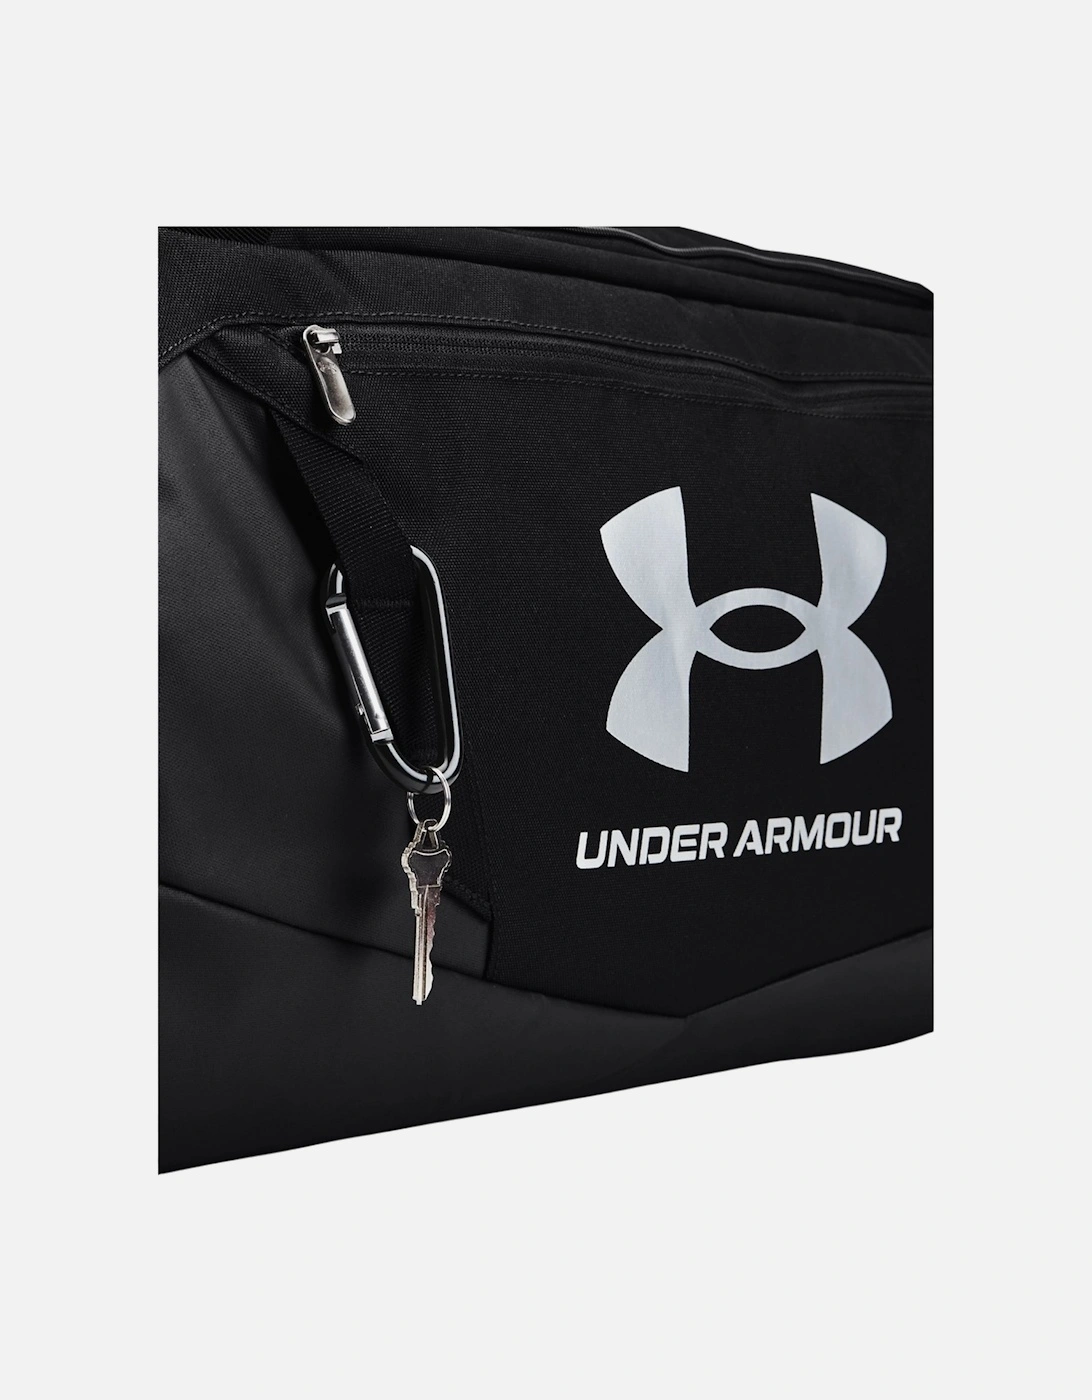 Undeniable 5.0 Camouflage Duffle Bag